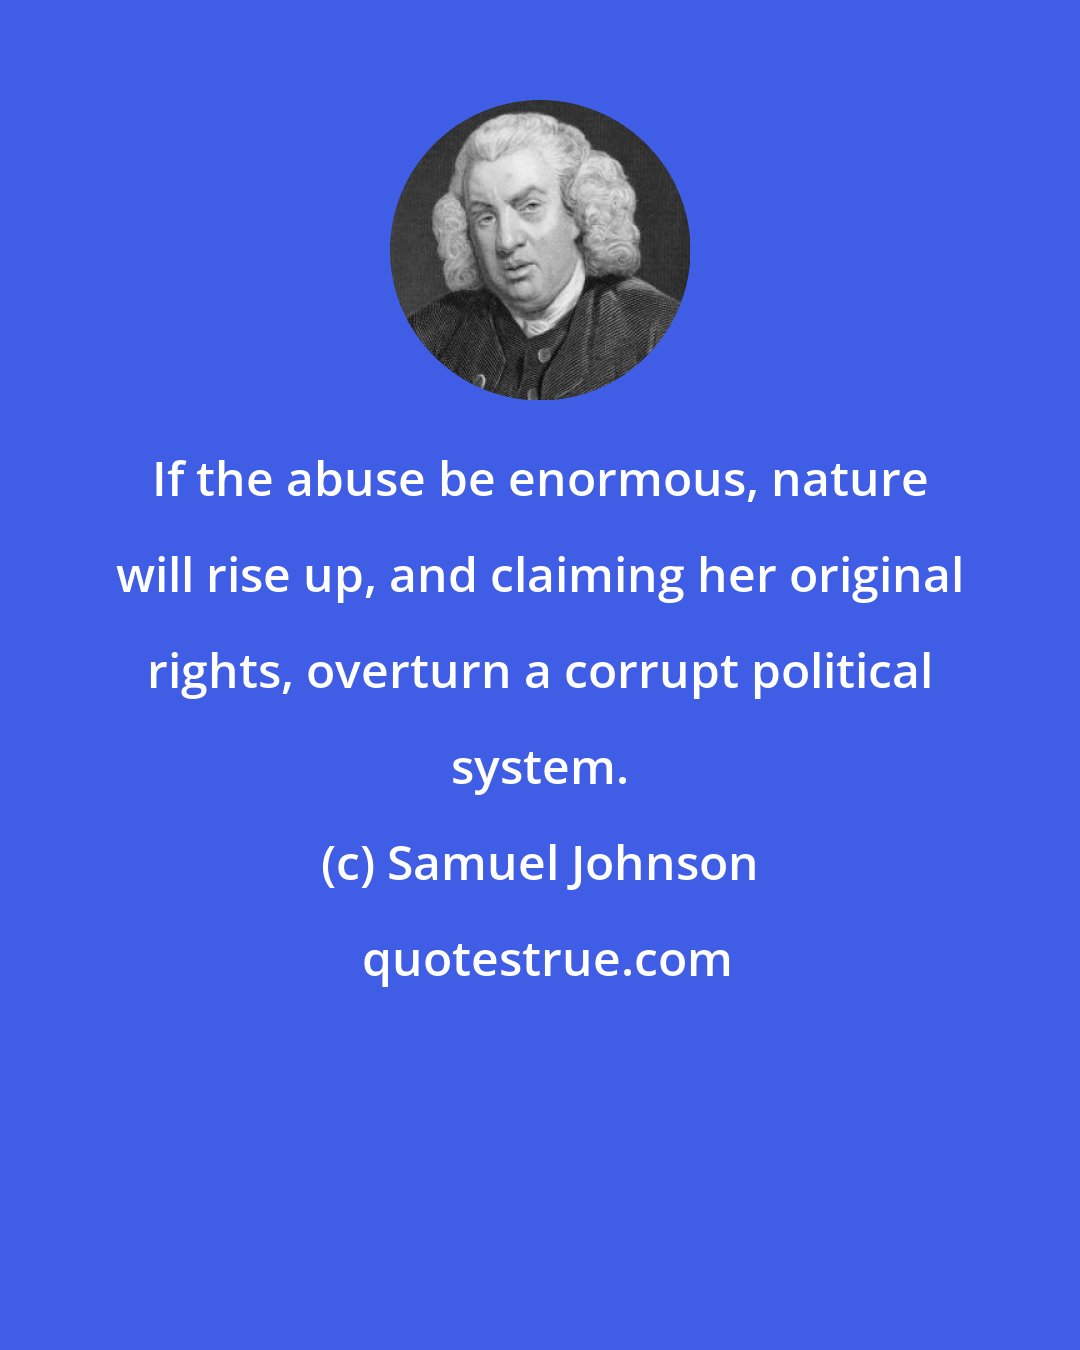 Samuel Johnson: If the abuse be enormous, nature will rise up, and claiming her original rights, overturn a corrupt political system.